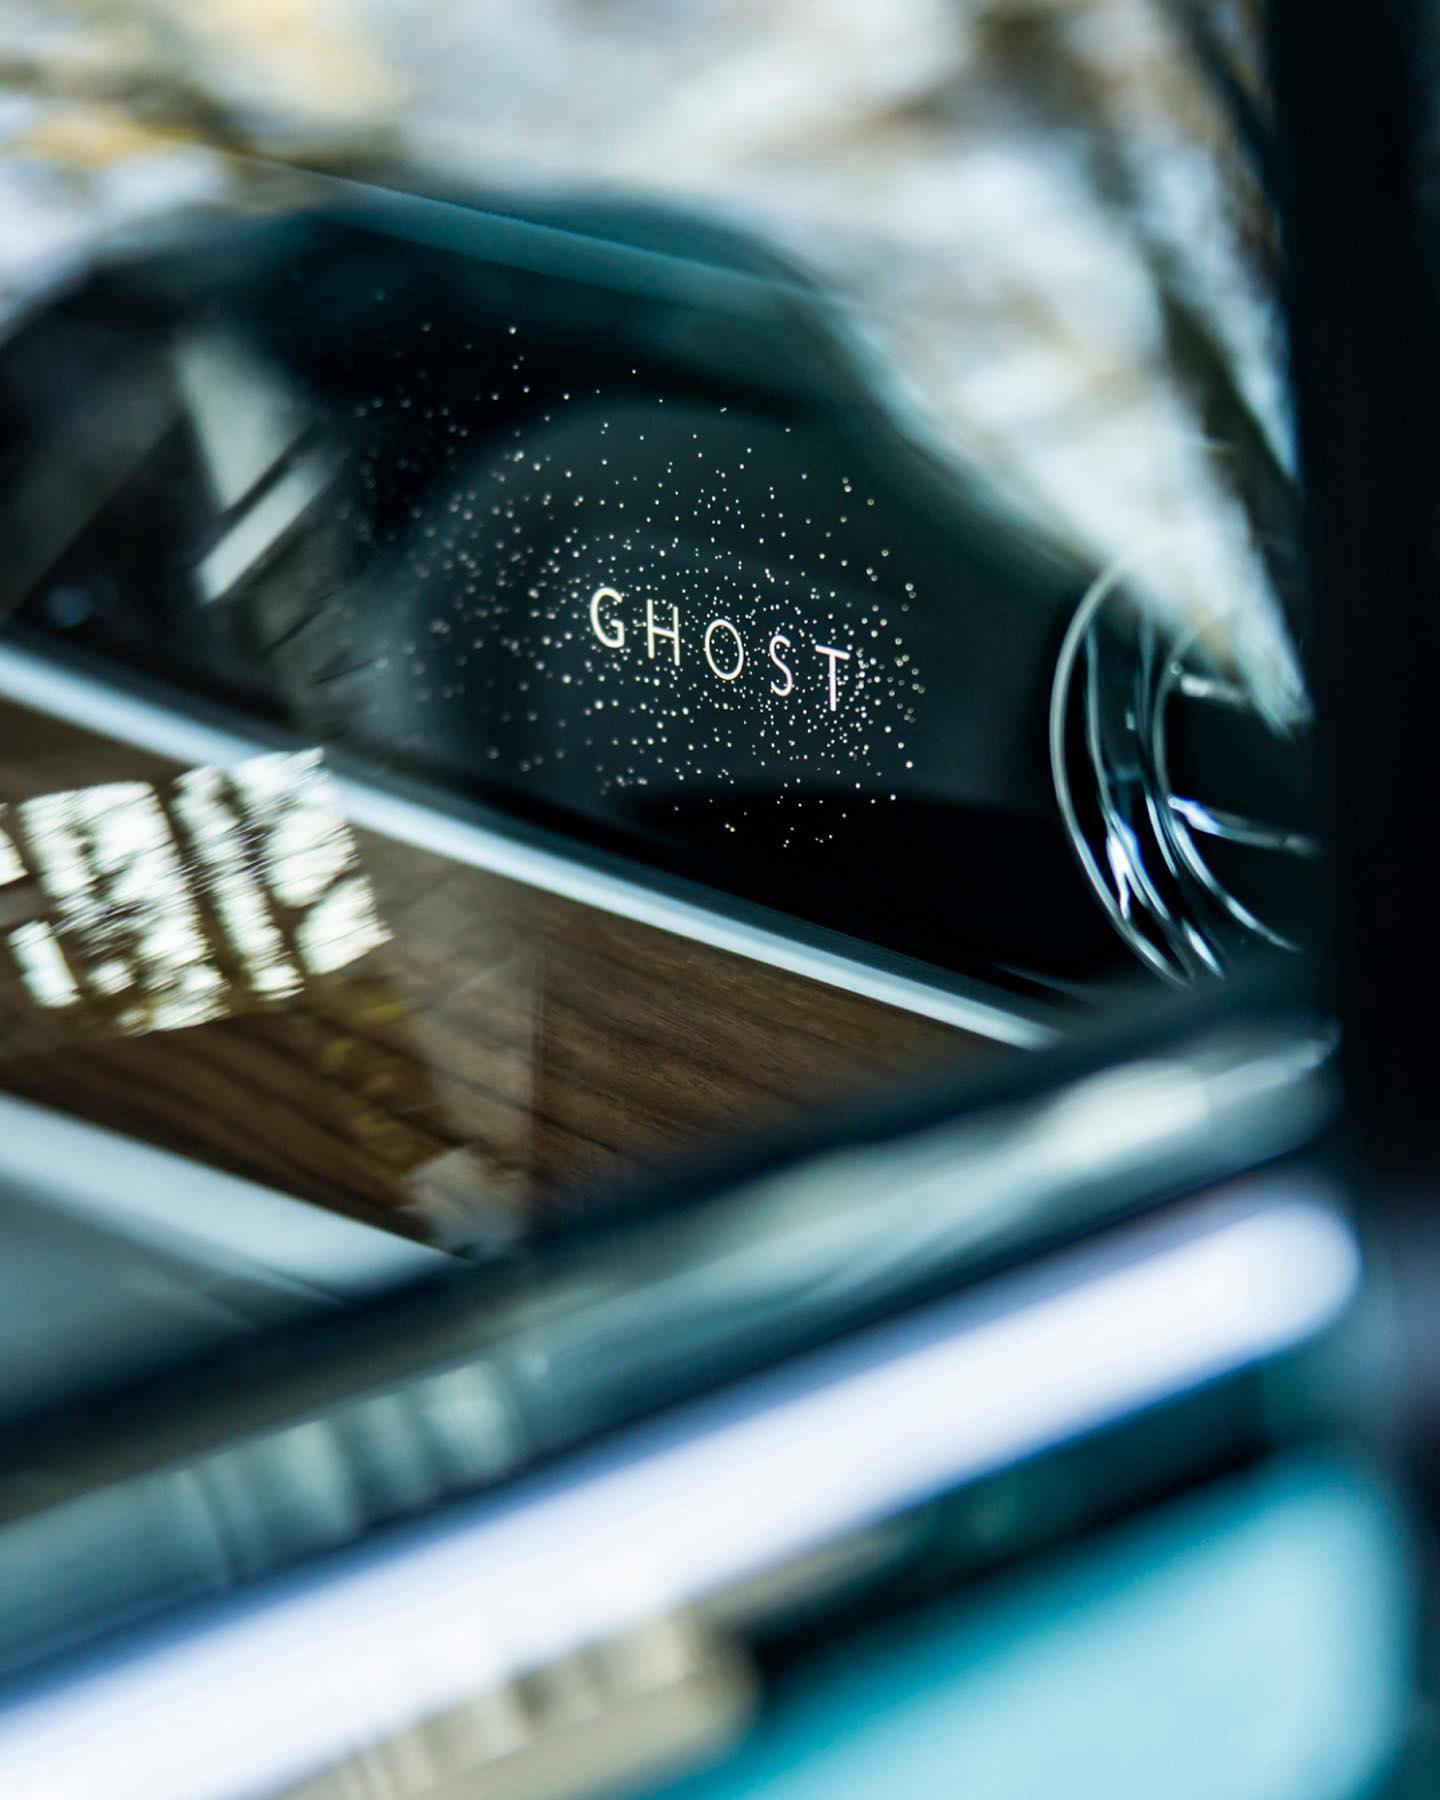 image  1 Rolls-Royce Motor Cars - Escape to a space of elegance with Ghost Extended